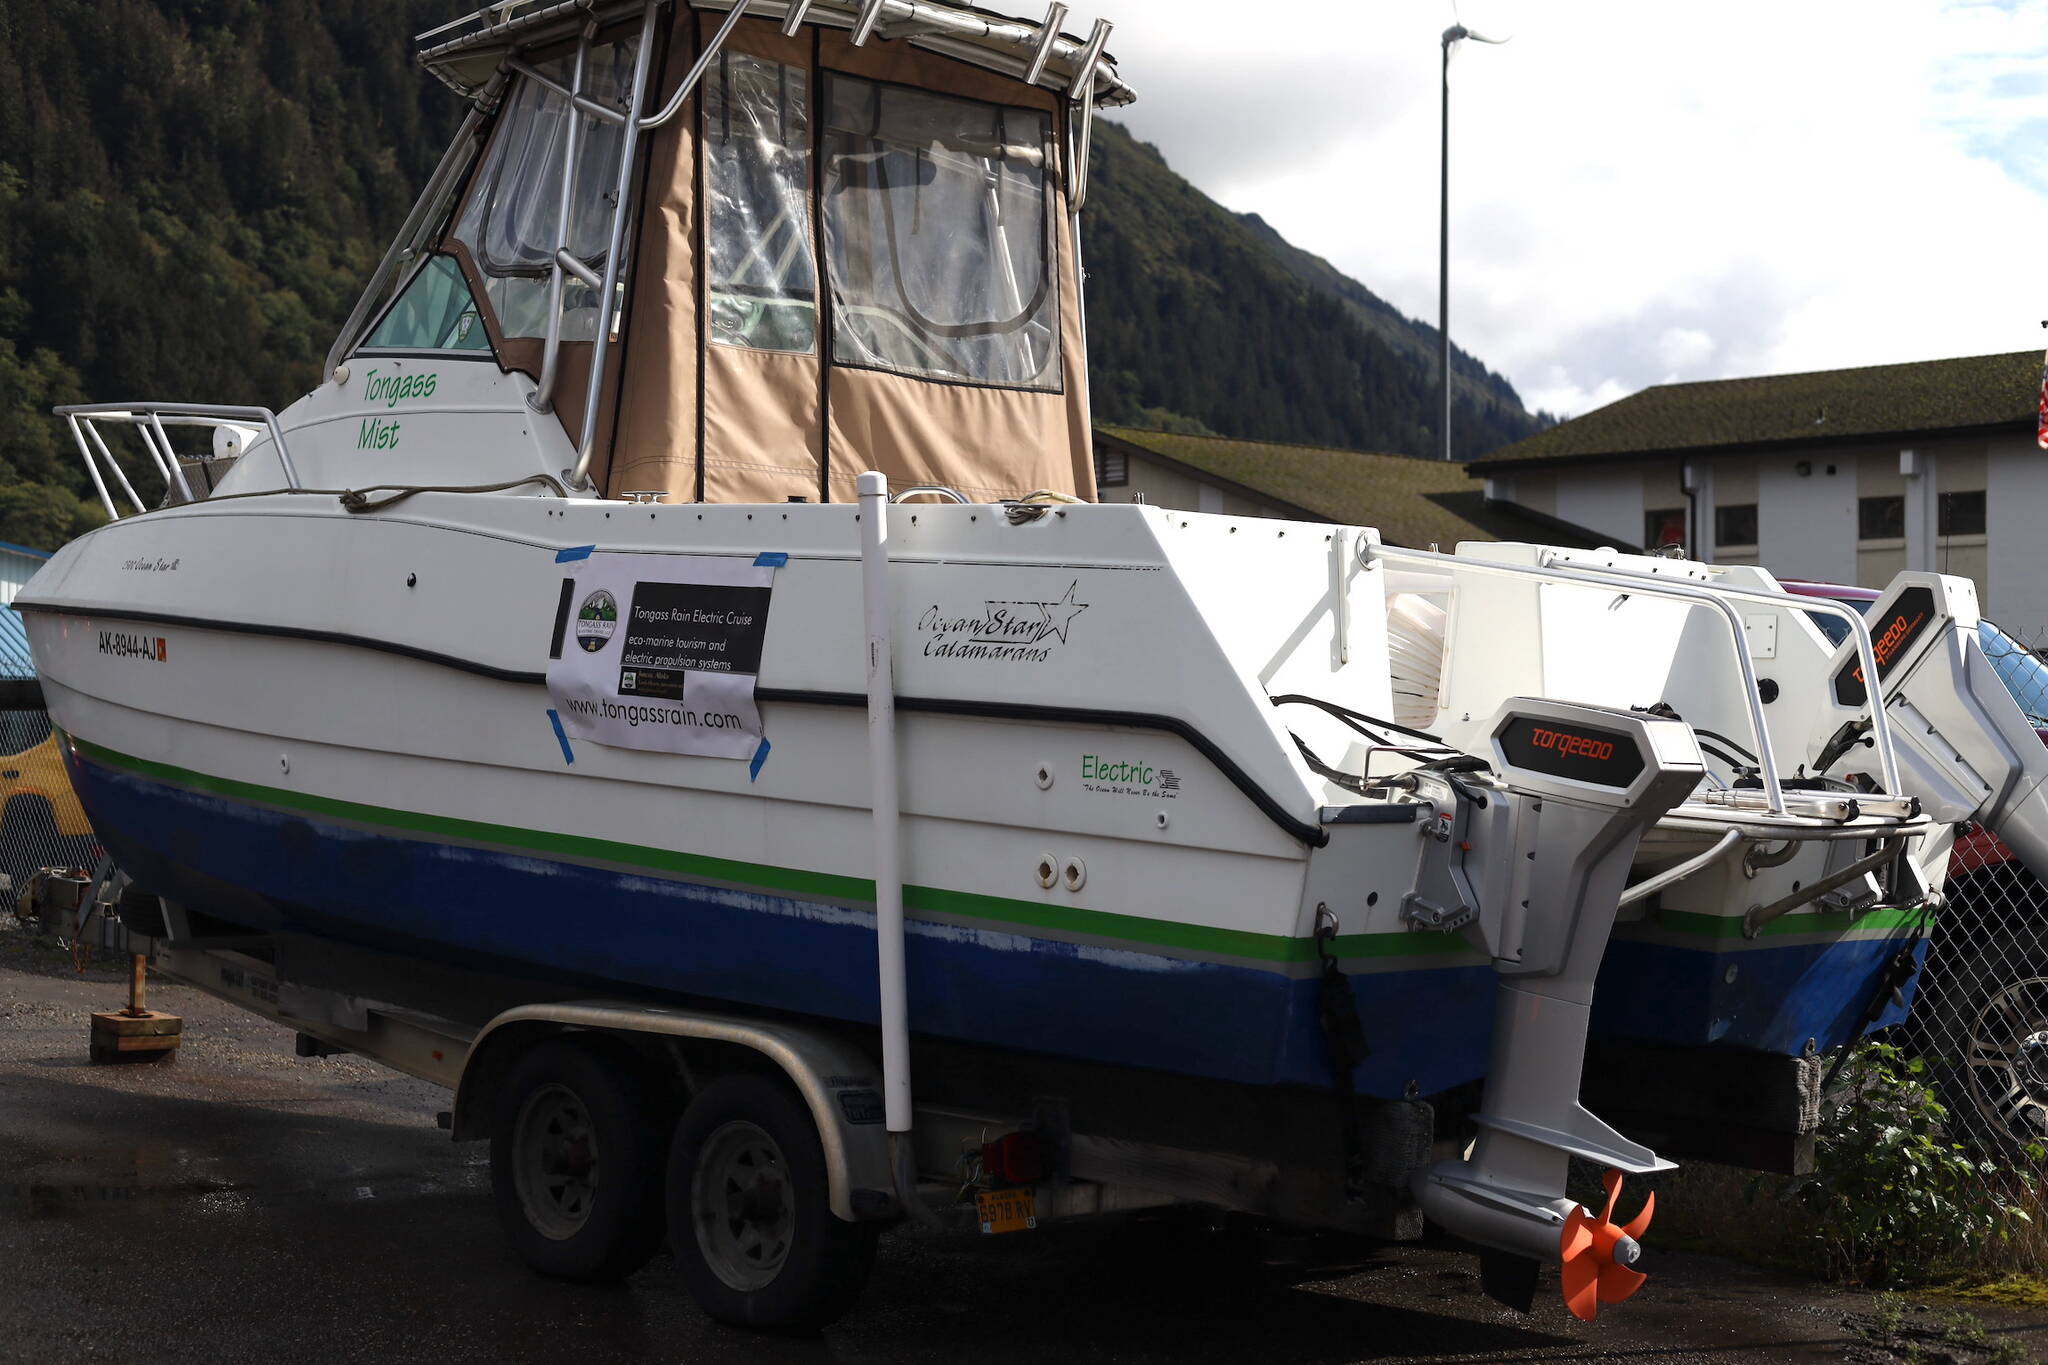 The Tongass Mist, a fully electrified custom-built boat, was one of the many vehicles parked at Juneau’s EV & E-bike Roundup downtown Saturday afternoon. (Clarise Larson / Juneau Empire)